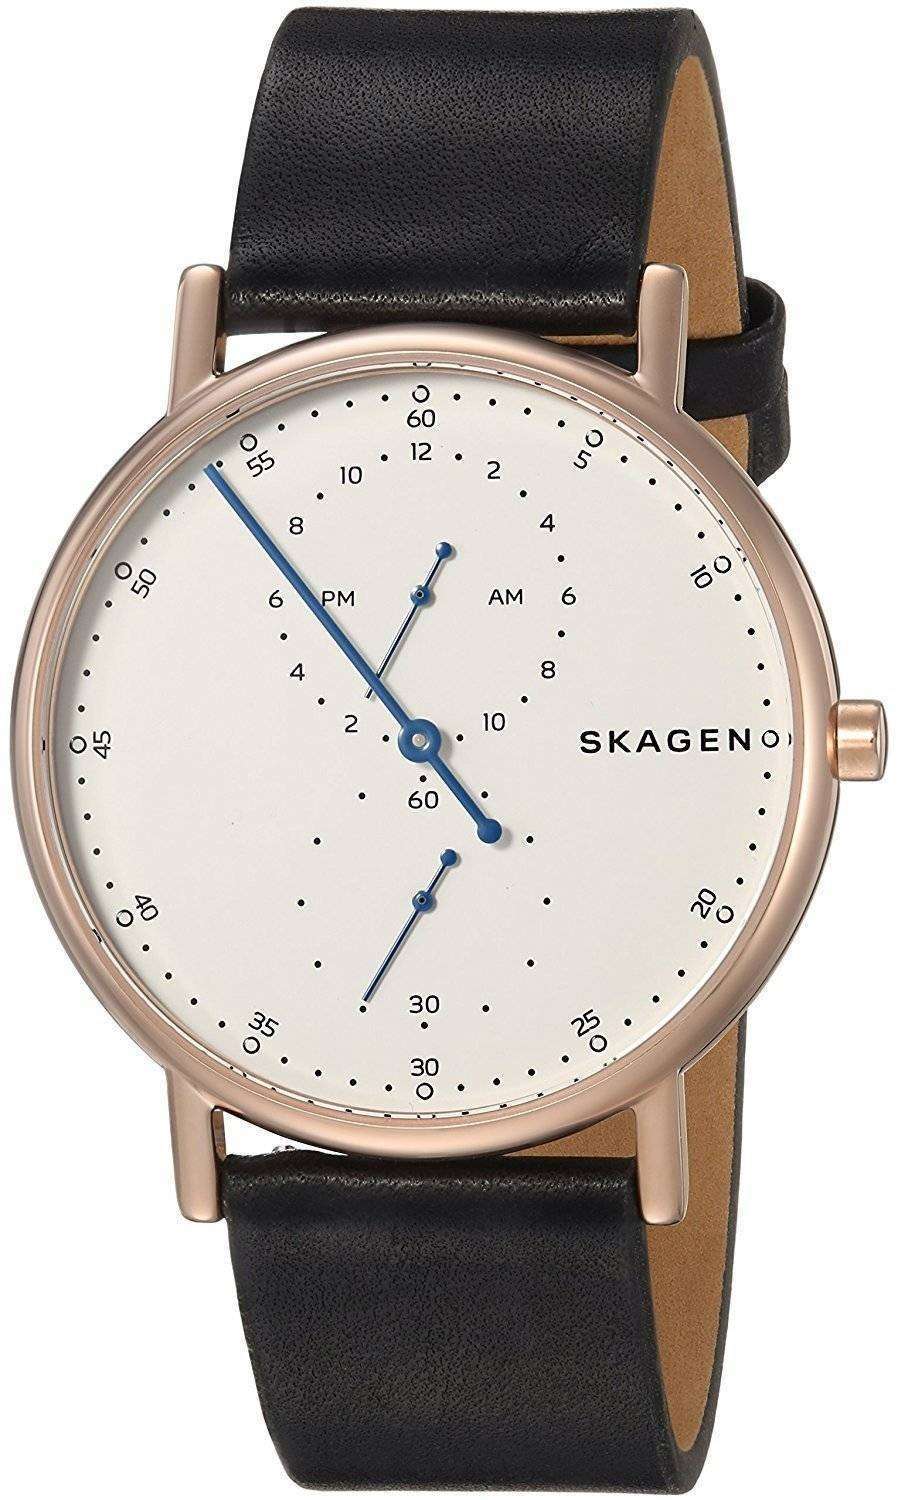 Buy Skagen Grenen Lille Analog White Dial Women's Watch-SKW3035 Online at  Low Prices in India - Amazon.in